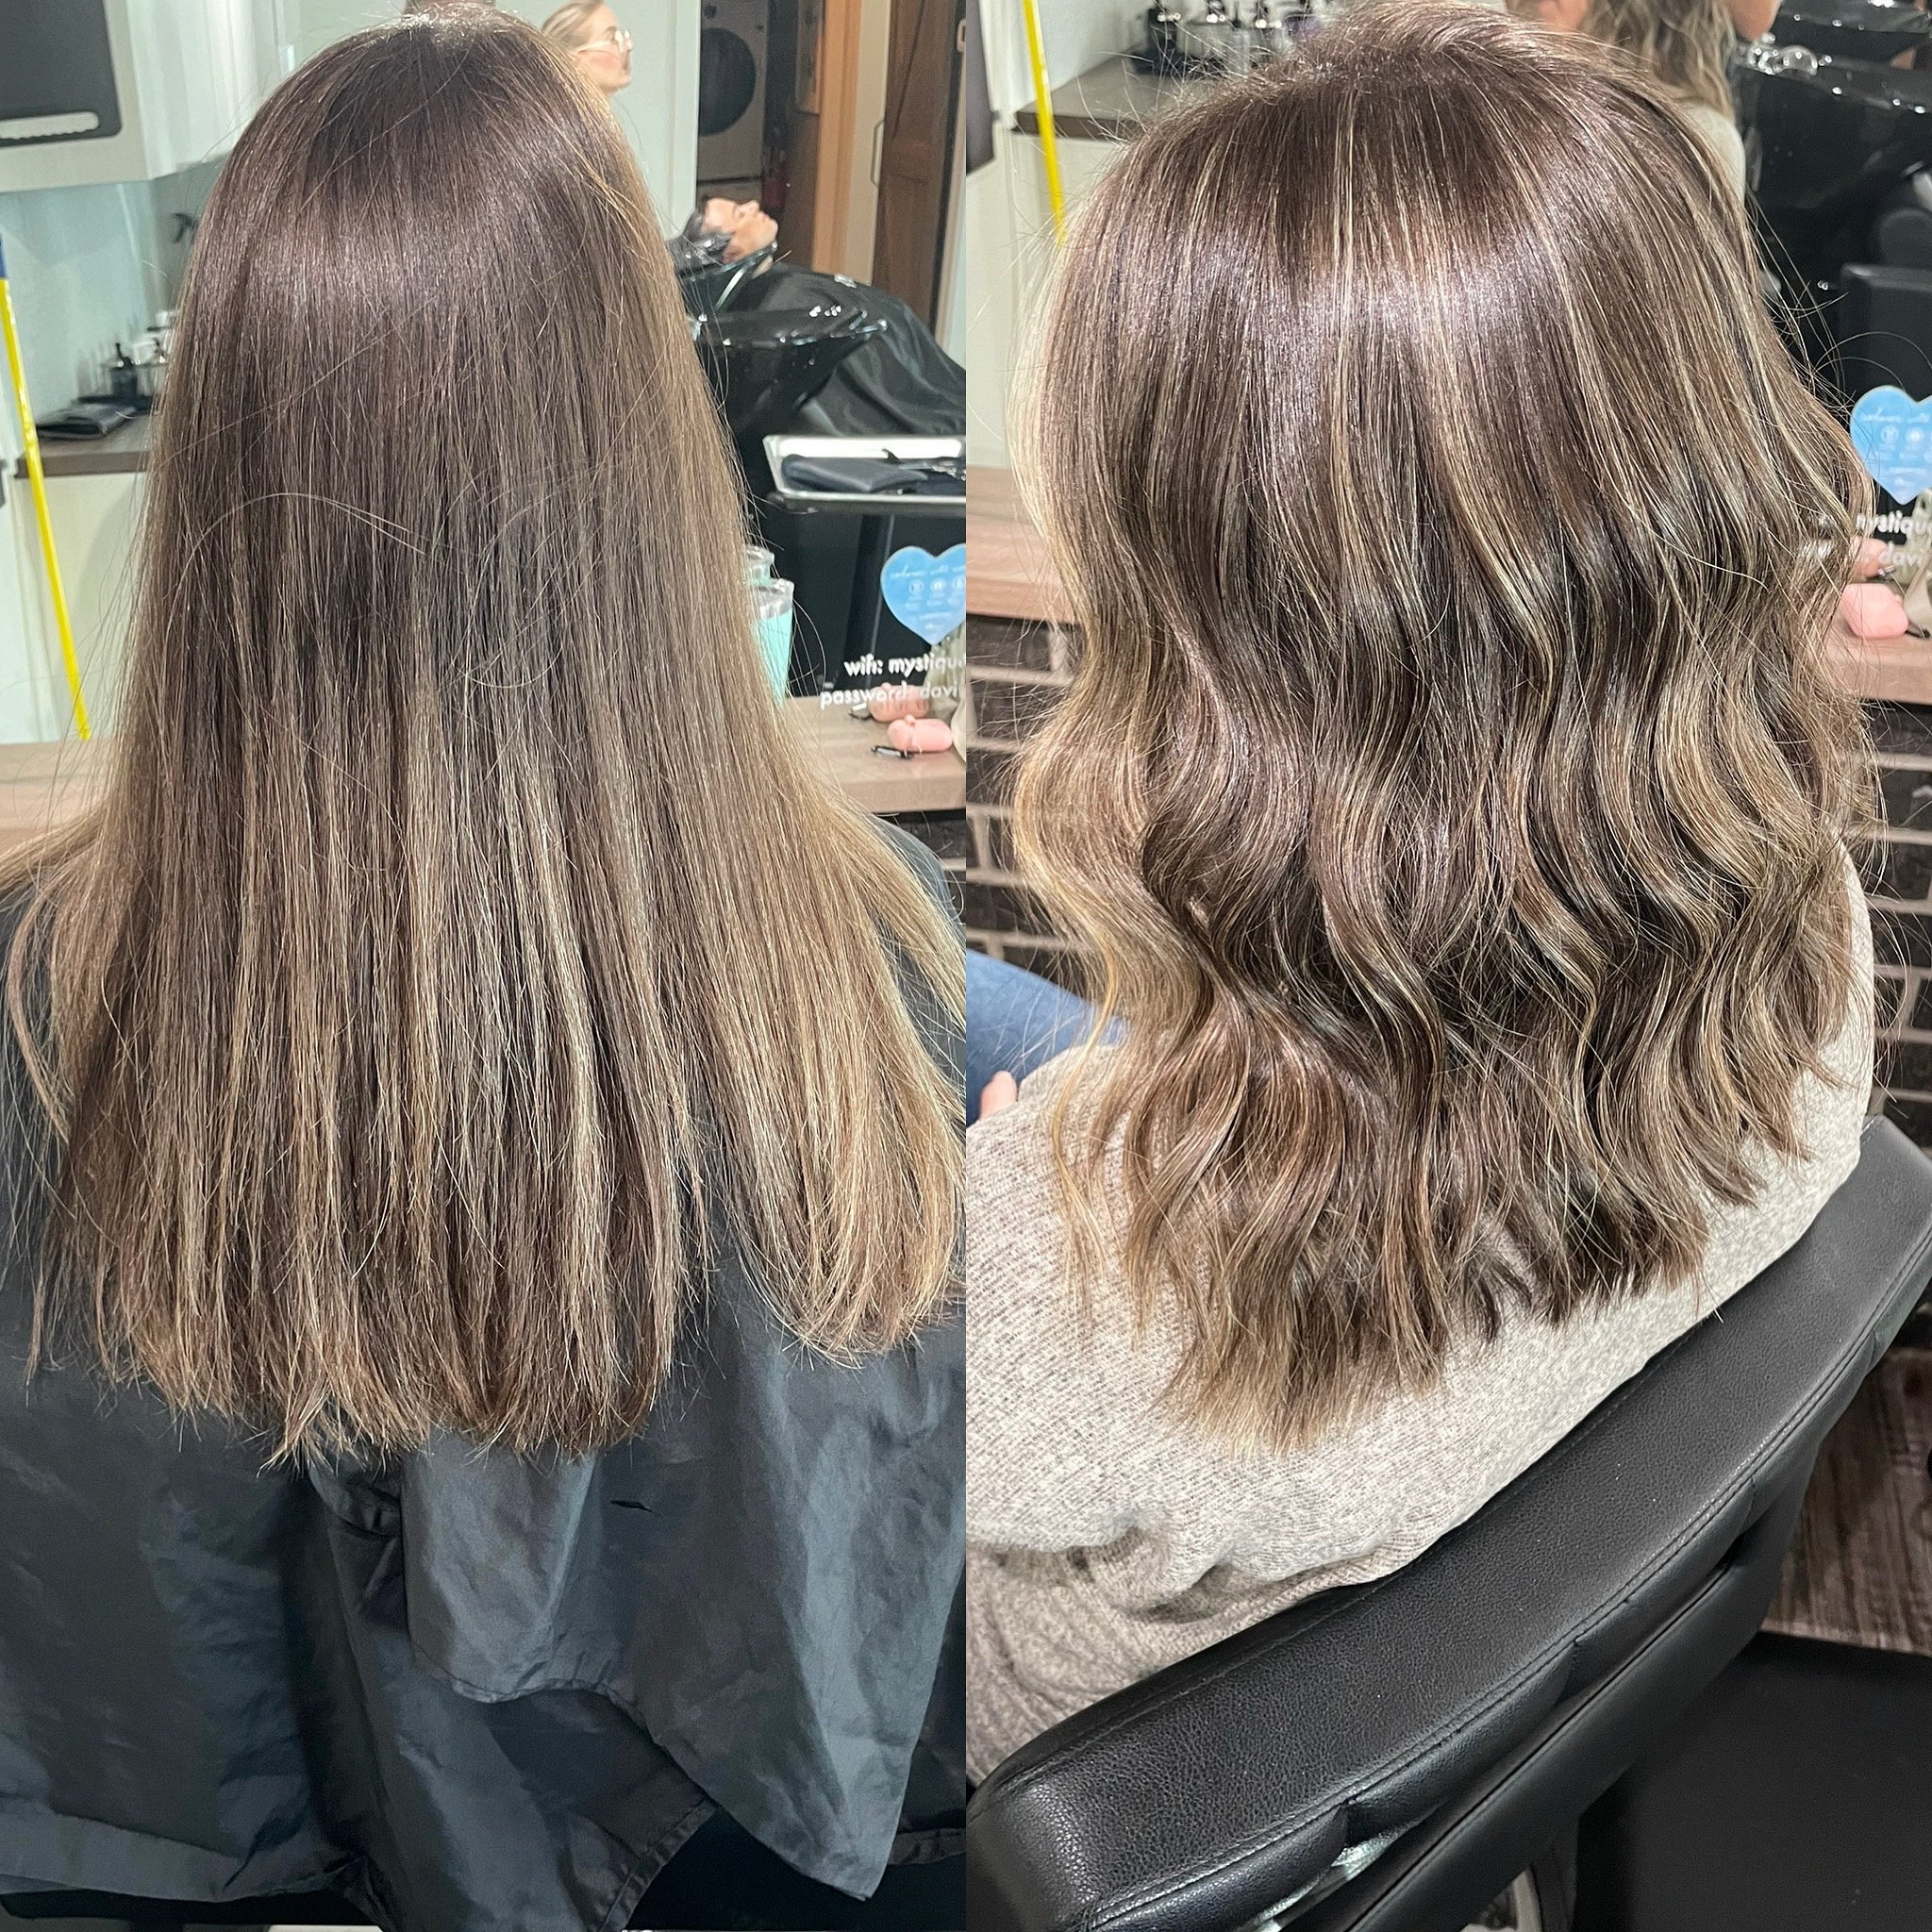 Transforming tresses at Mystique Hair Design! Witness Jessa's magical touch with a stunning before and after. From grown out highlights  to refreshed highlights and layered perfection, she's giving spring vibes a whole new meaning. 🌸 Book your appoi